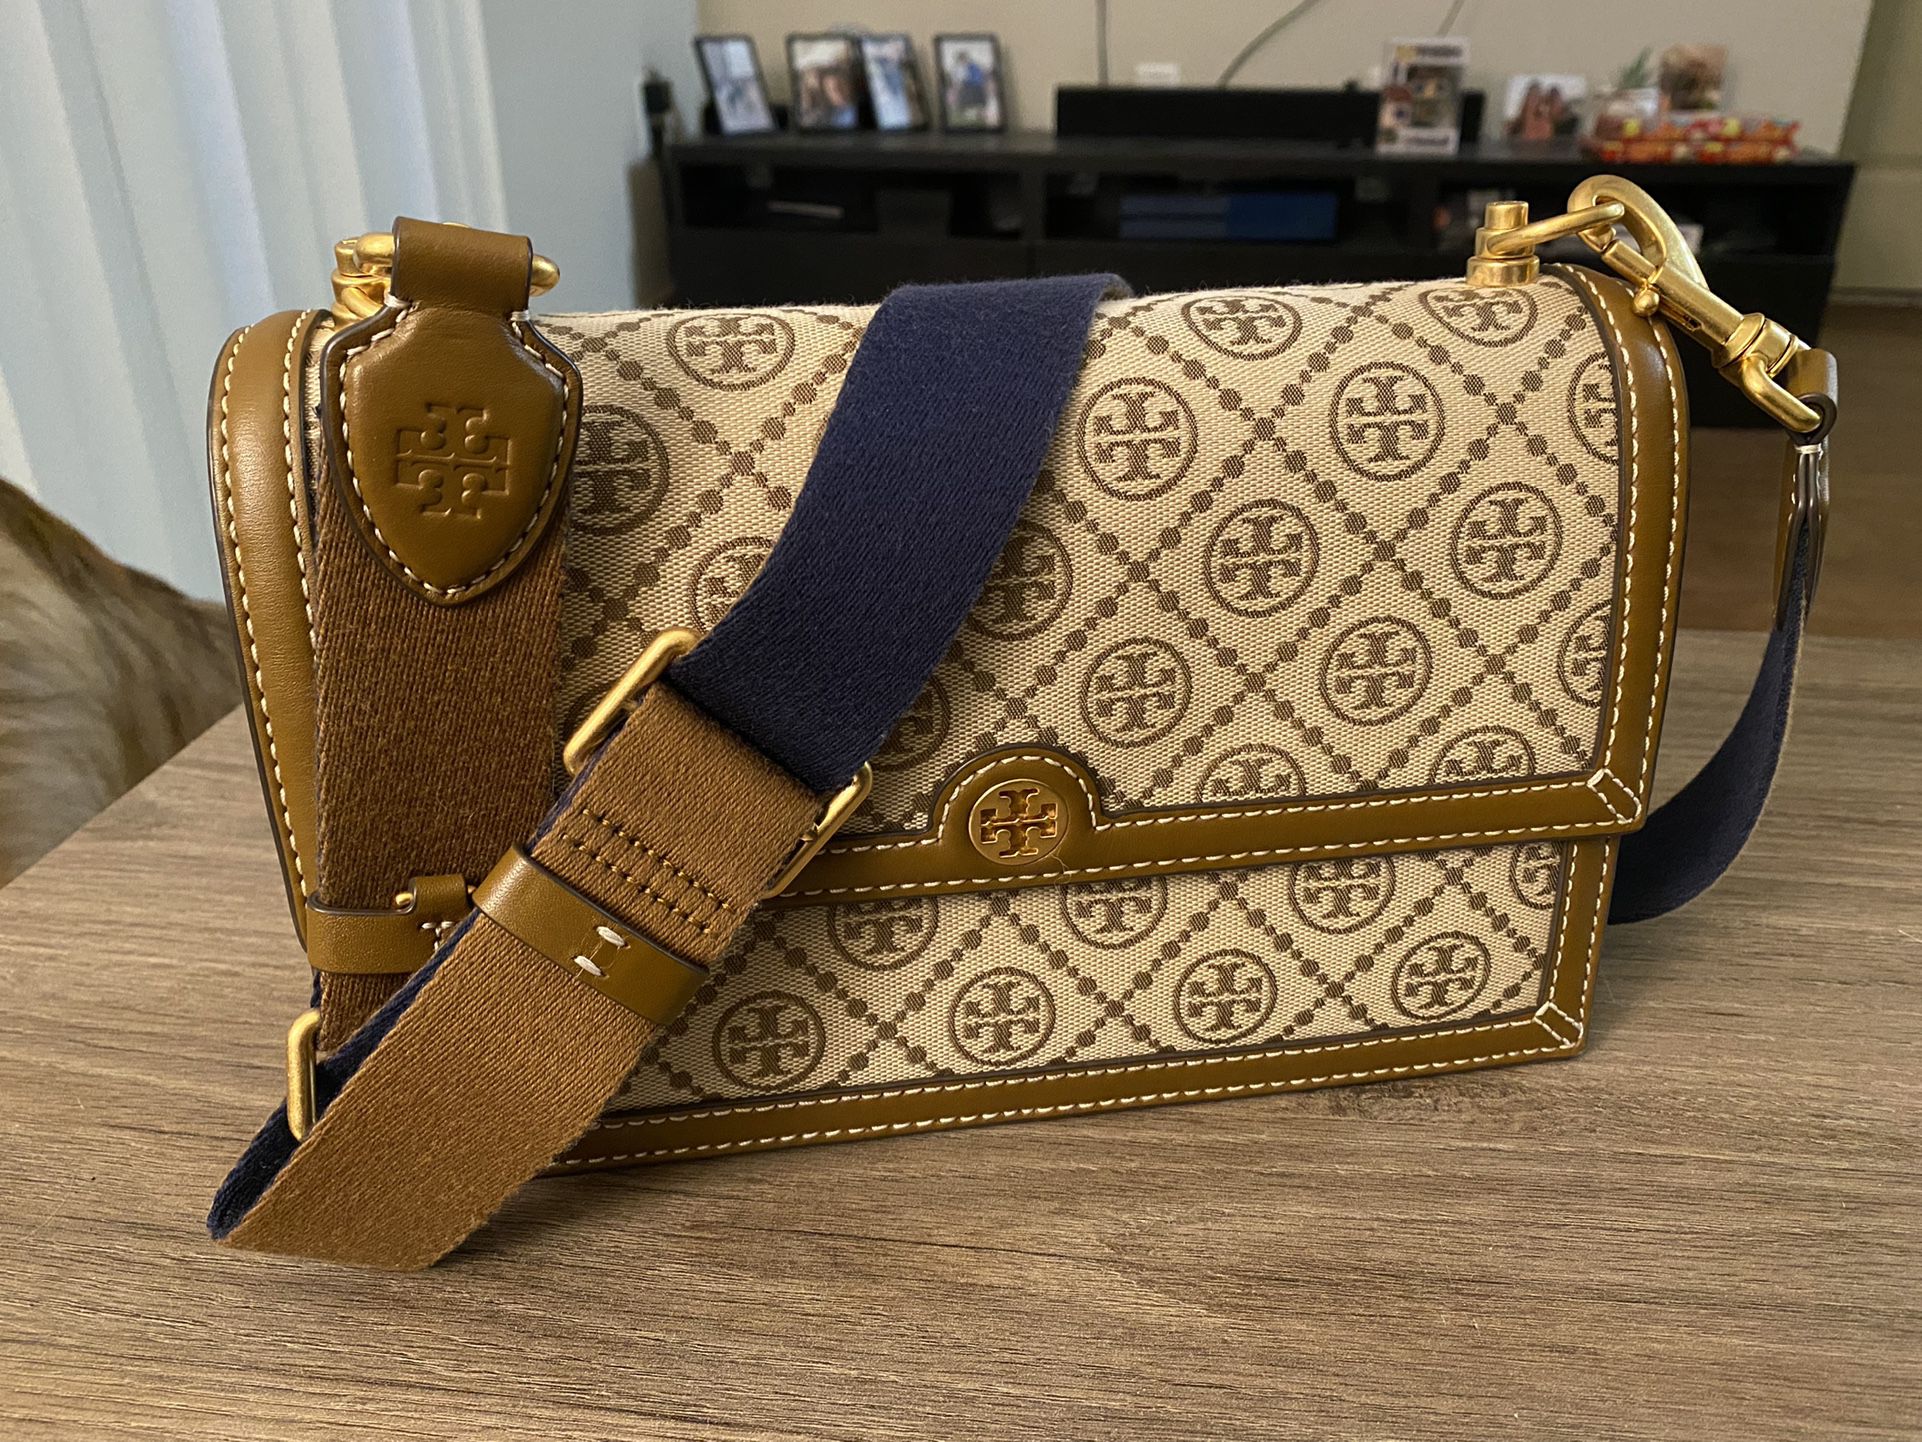 Tory Burch Crossbody Bag for Sale in Houston, TX - OfferUp